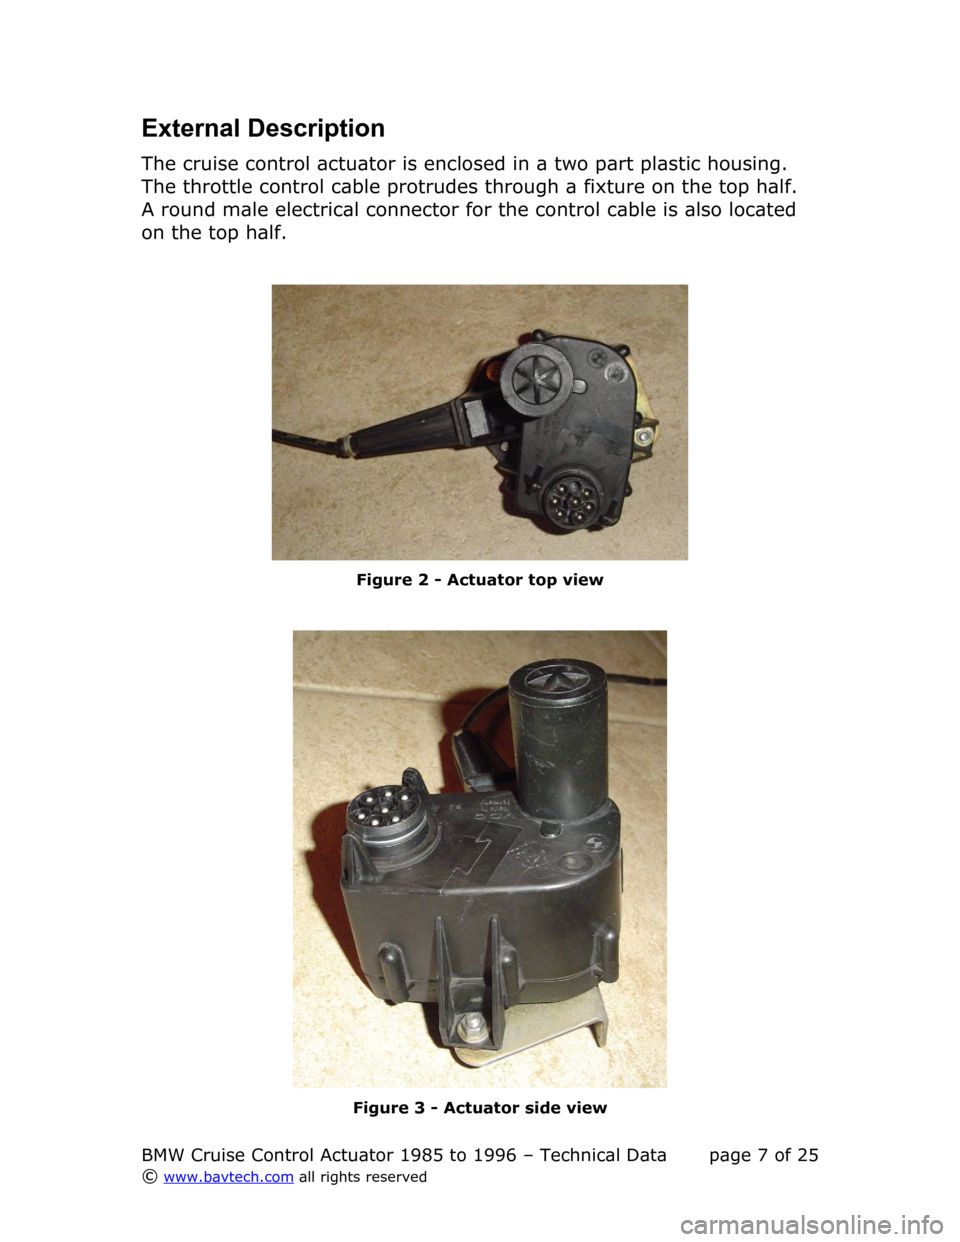 BMW 3 SERIES 1989 E36 Cruise Control Acutator Technical Data Workshop Manual External Description
The cruise control actuator is enclosed in a two part plastic housing.  
The throttle control cable protrudes through a fixture on the top half.  
A round male electrical connecto